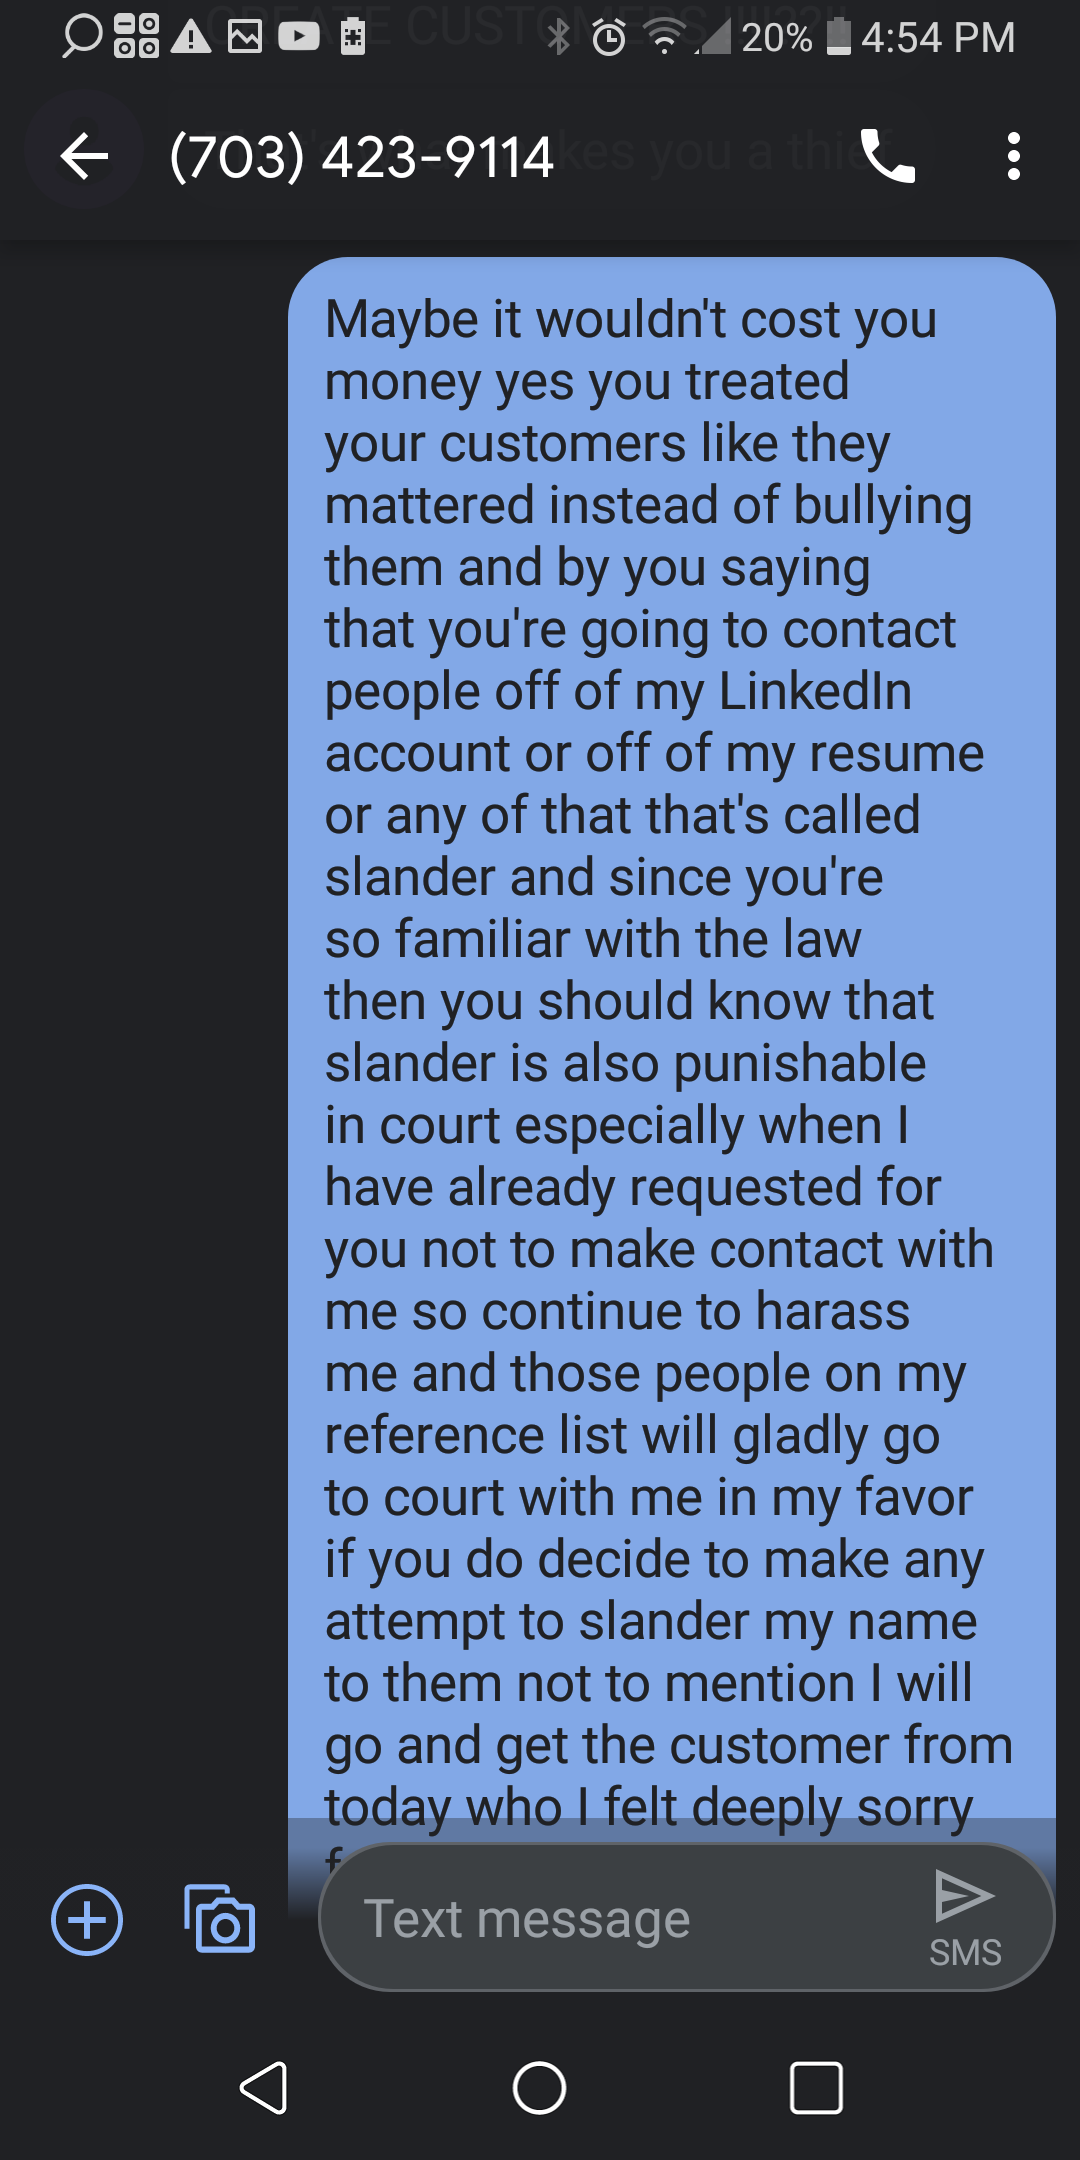 Gray filed this complaint, my messages are in blue